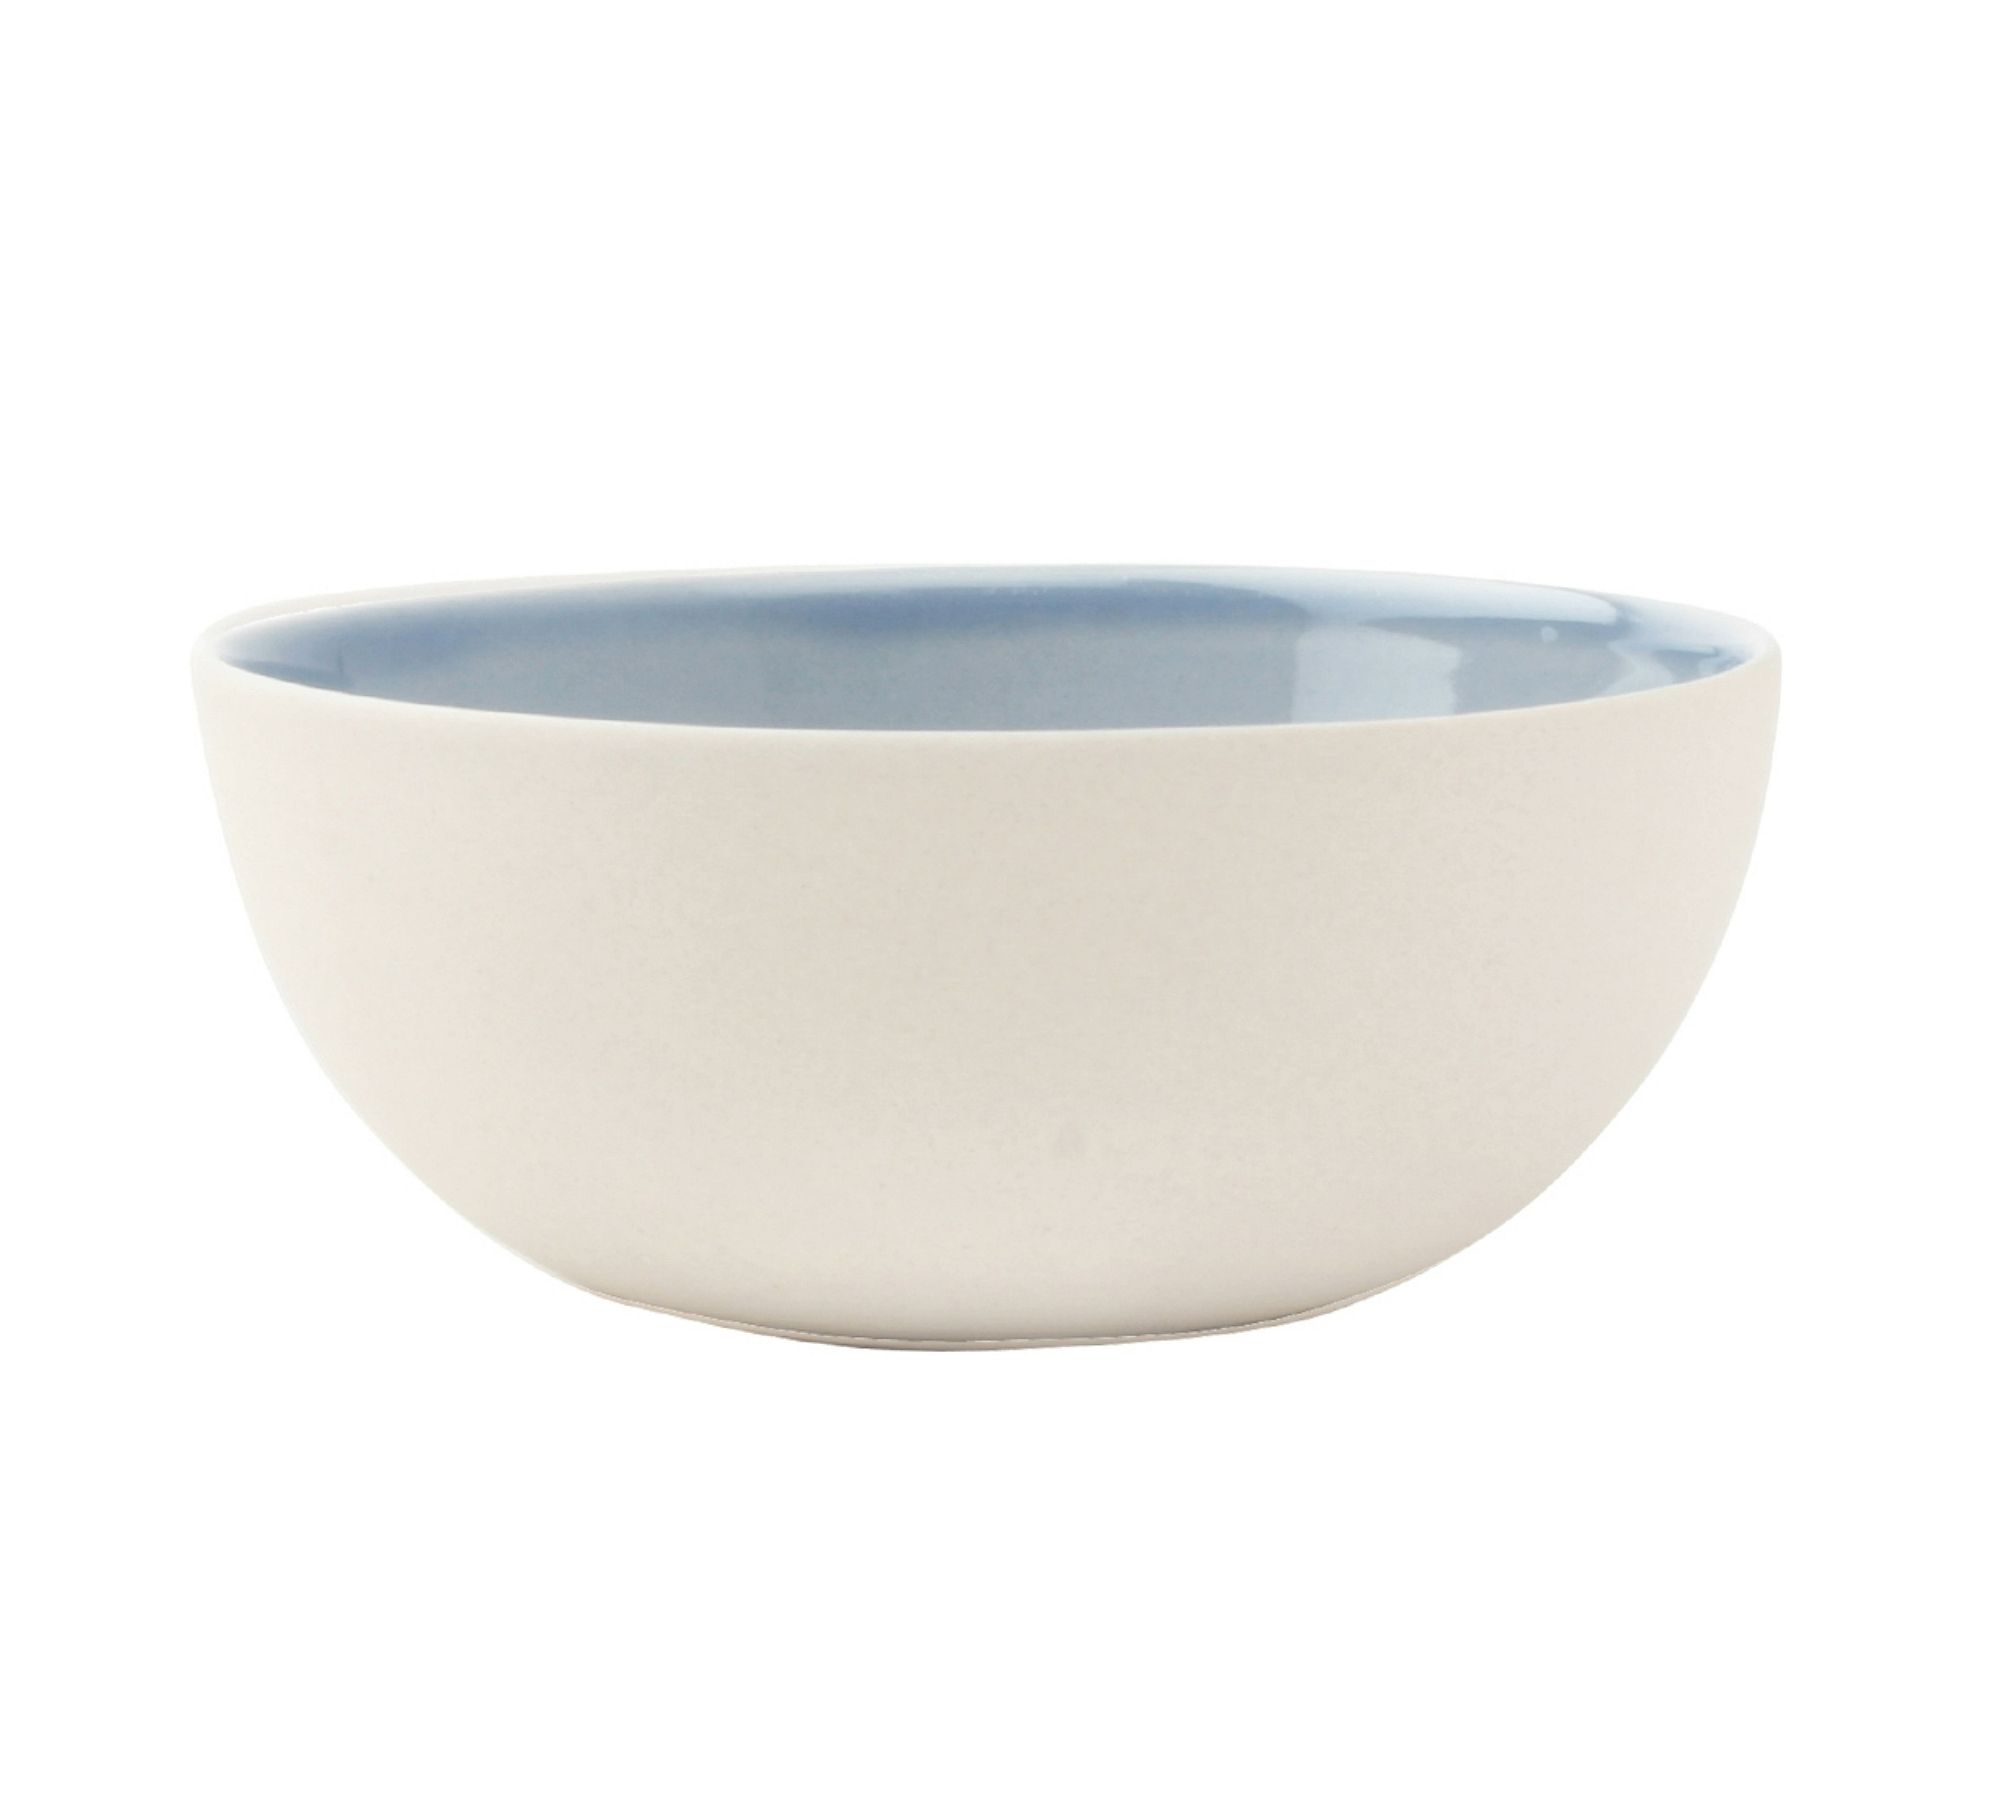 Shell Bisque Small Porcelain Bowl, Set of 4